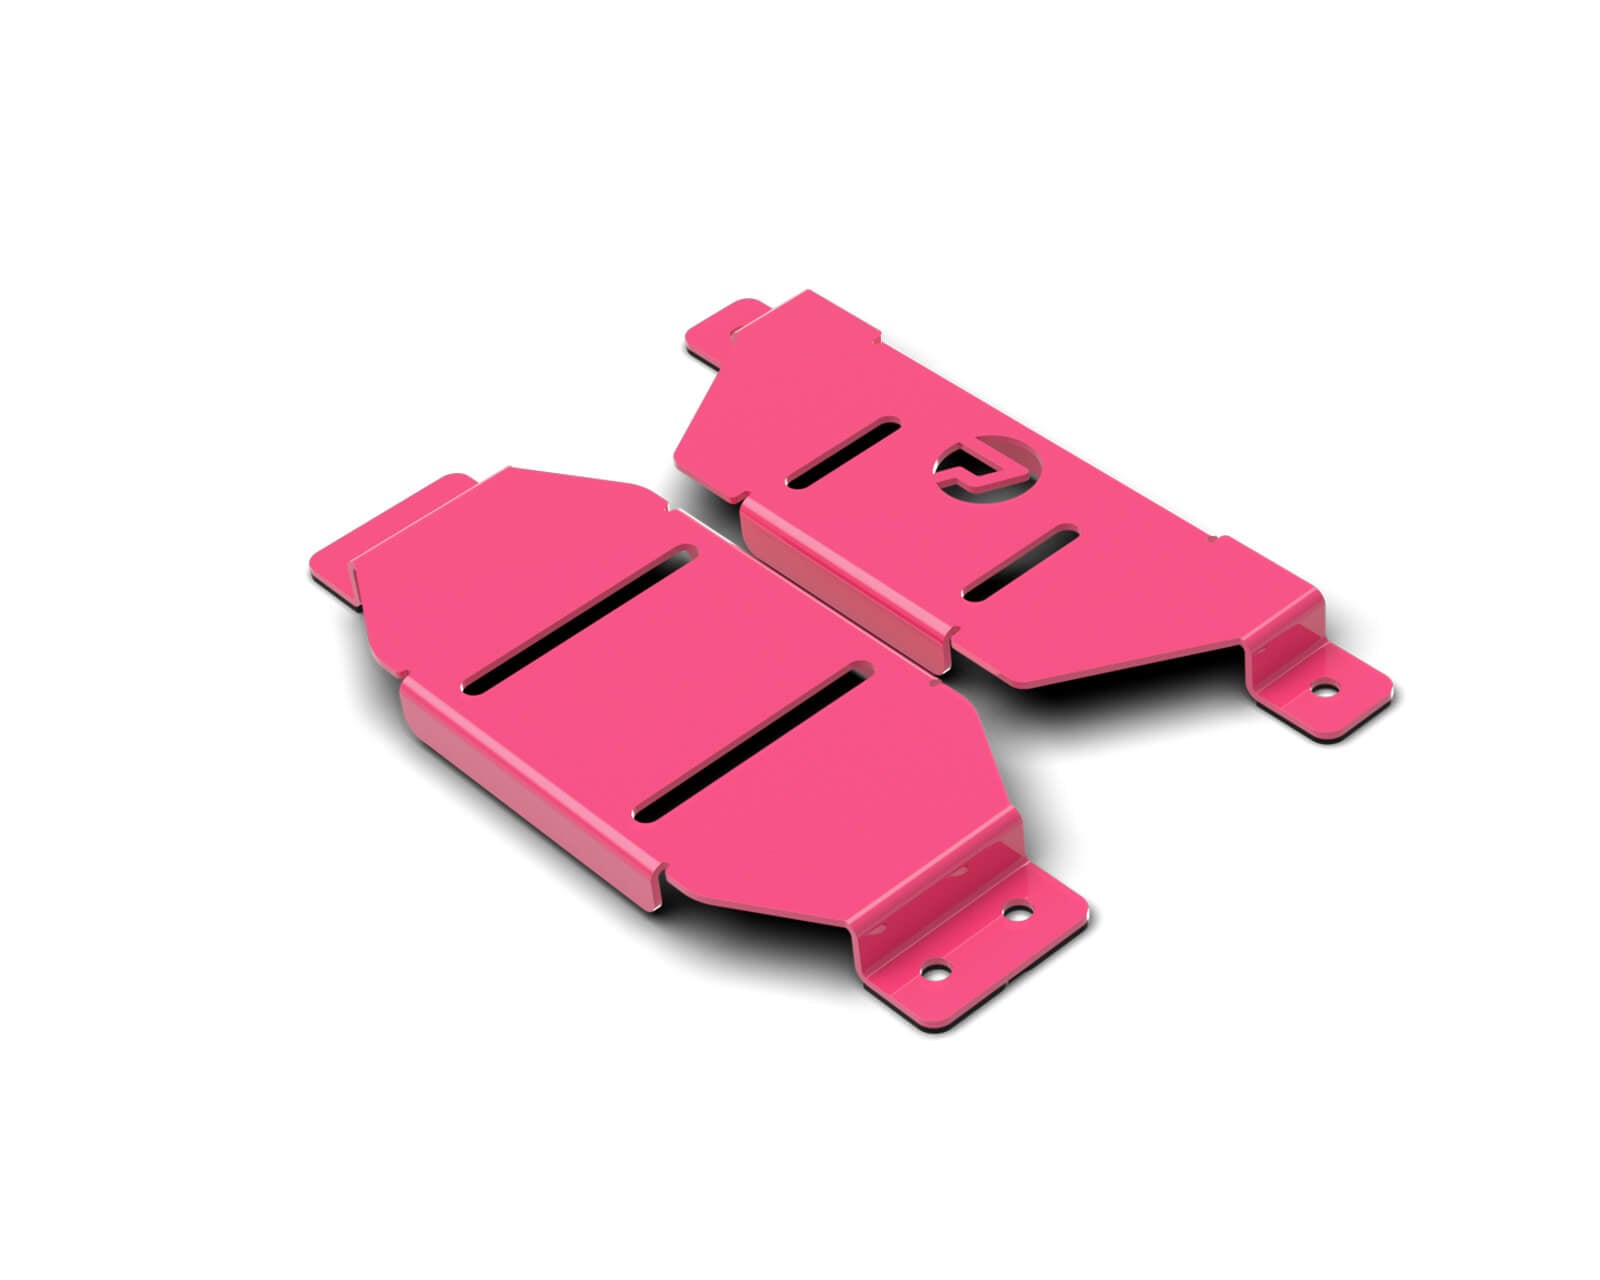 PrimoChill SX Offset CTR Hard Mount Reservoir to Radiator Mount - 140mm Series - PrimoChill - KEEPING IT COOL UV Pink